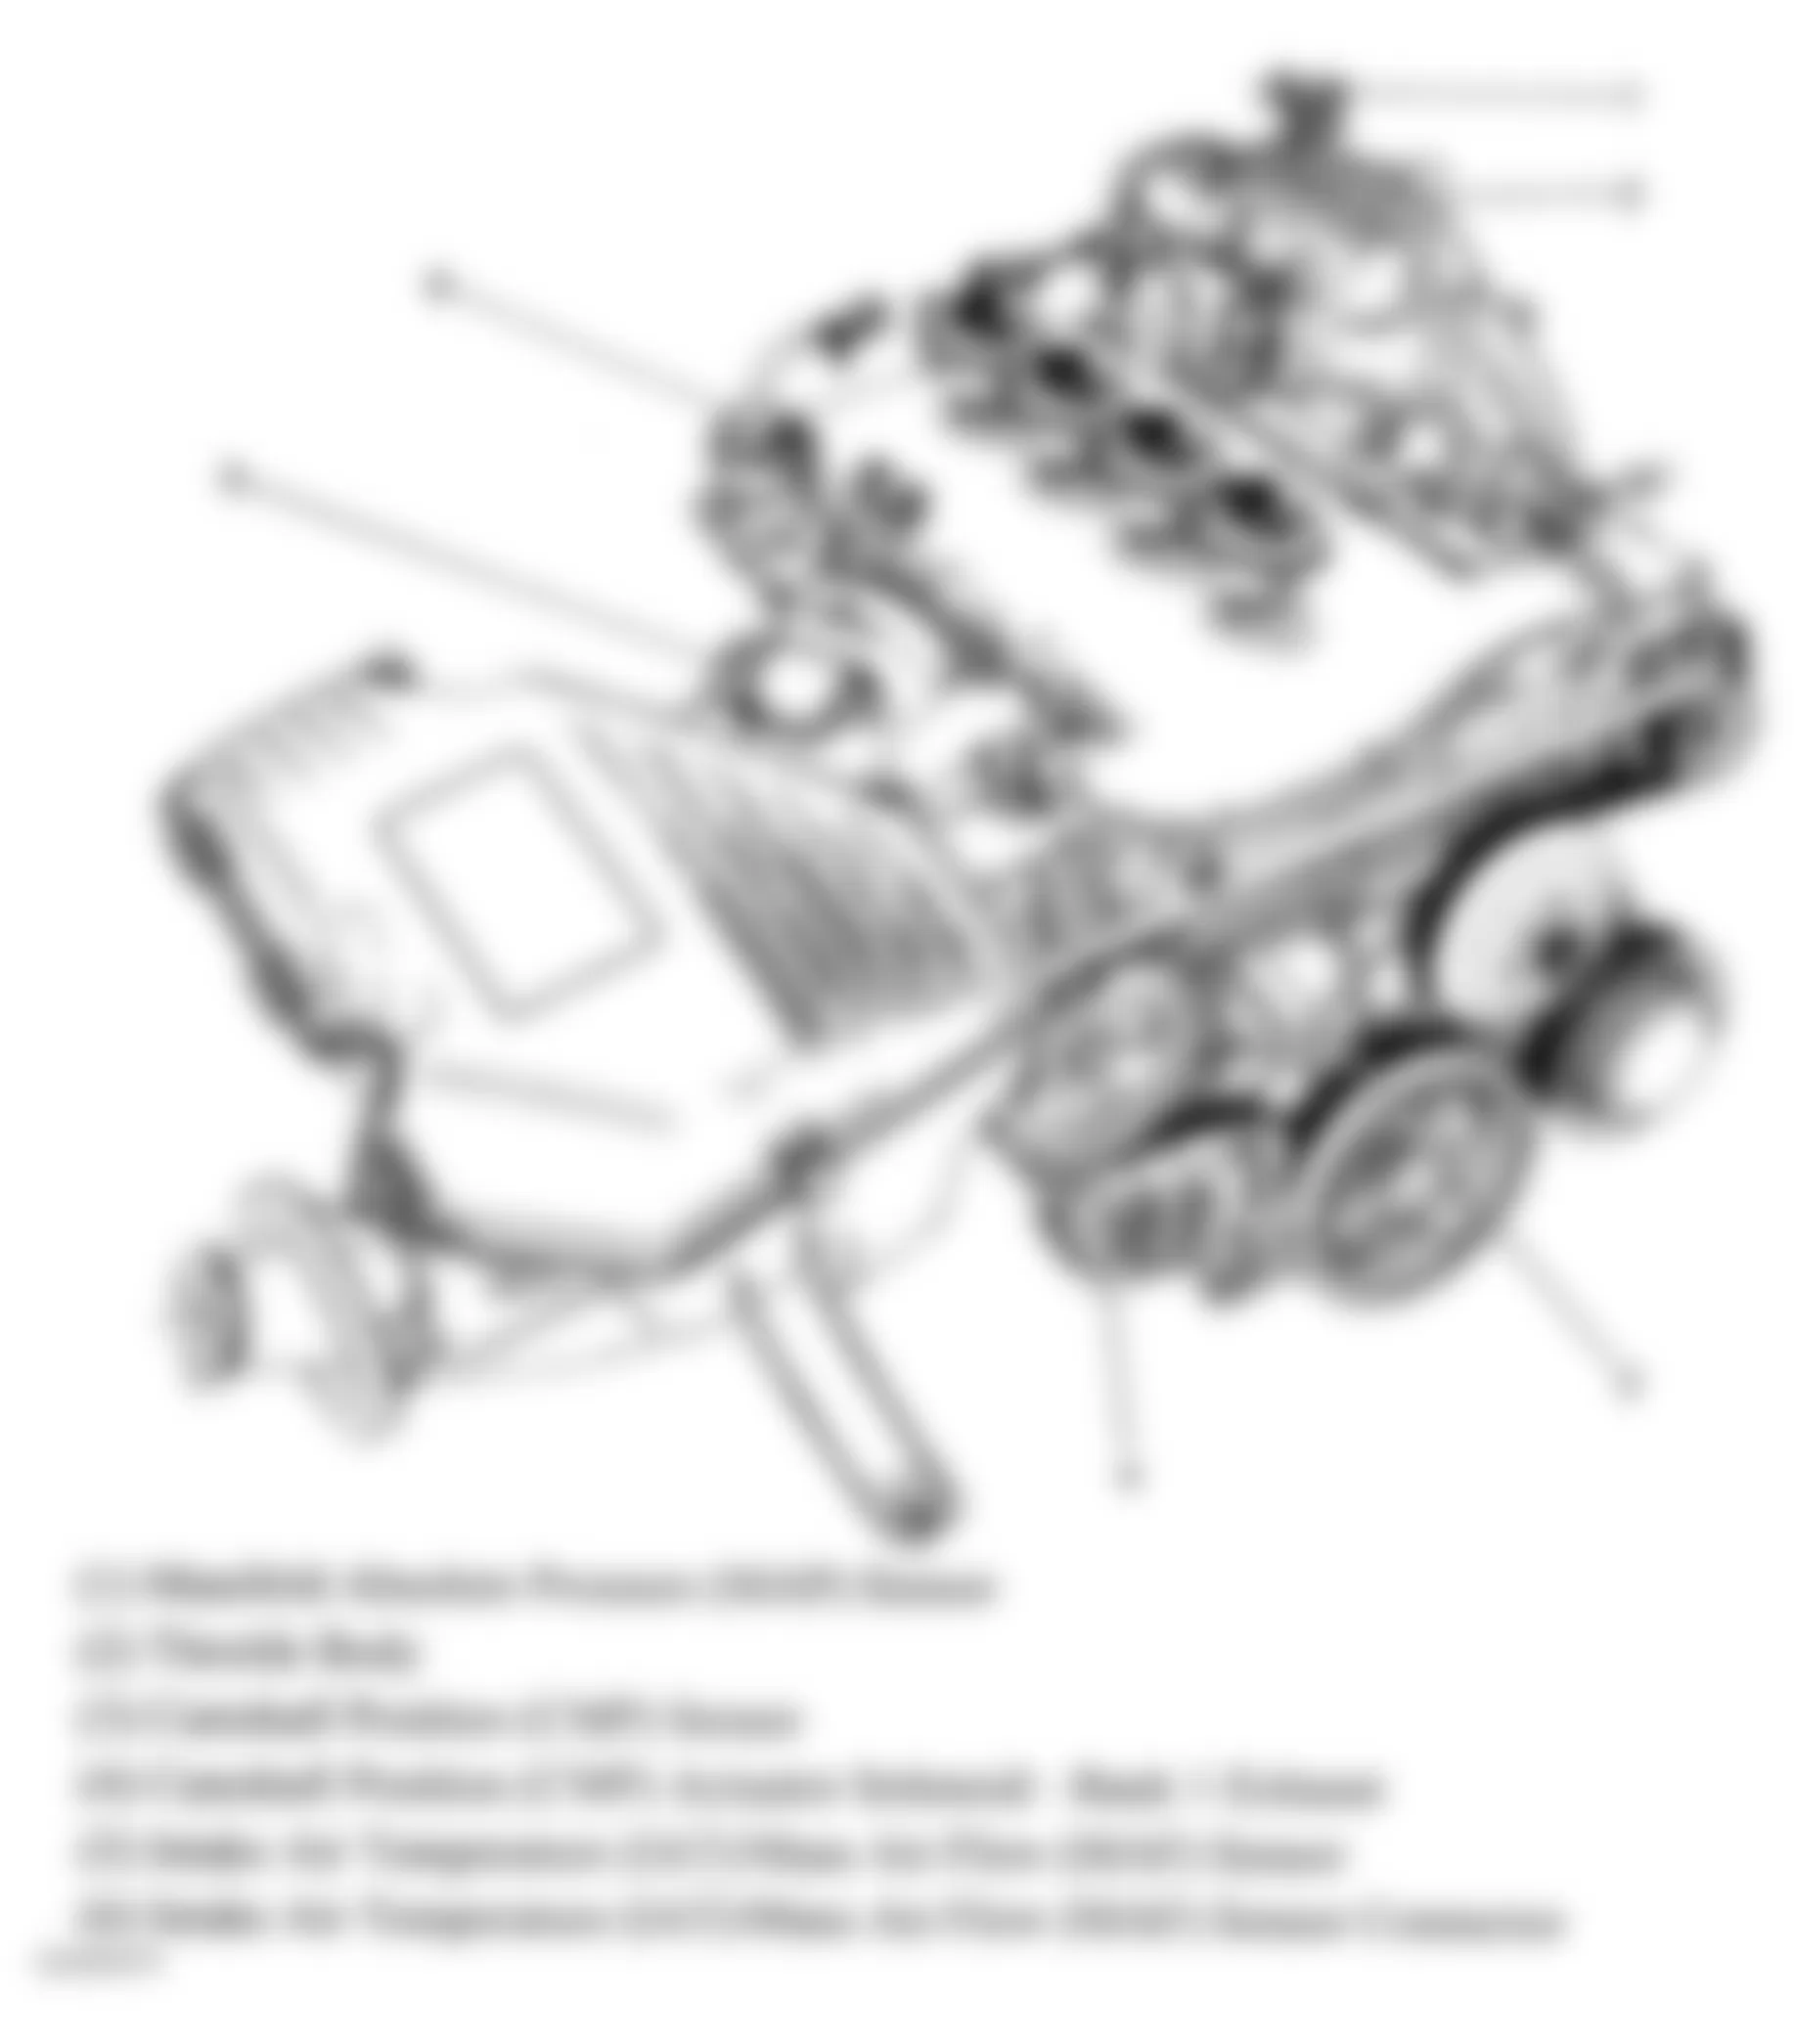 Chevrolet Colorado 2004 - Component Locations -  Top View Of Engine (2.8L)